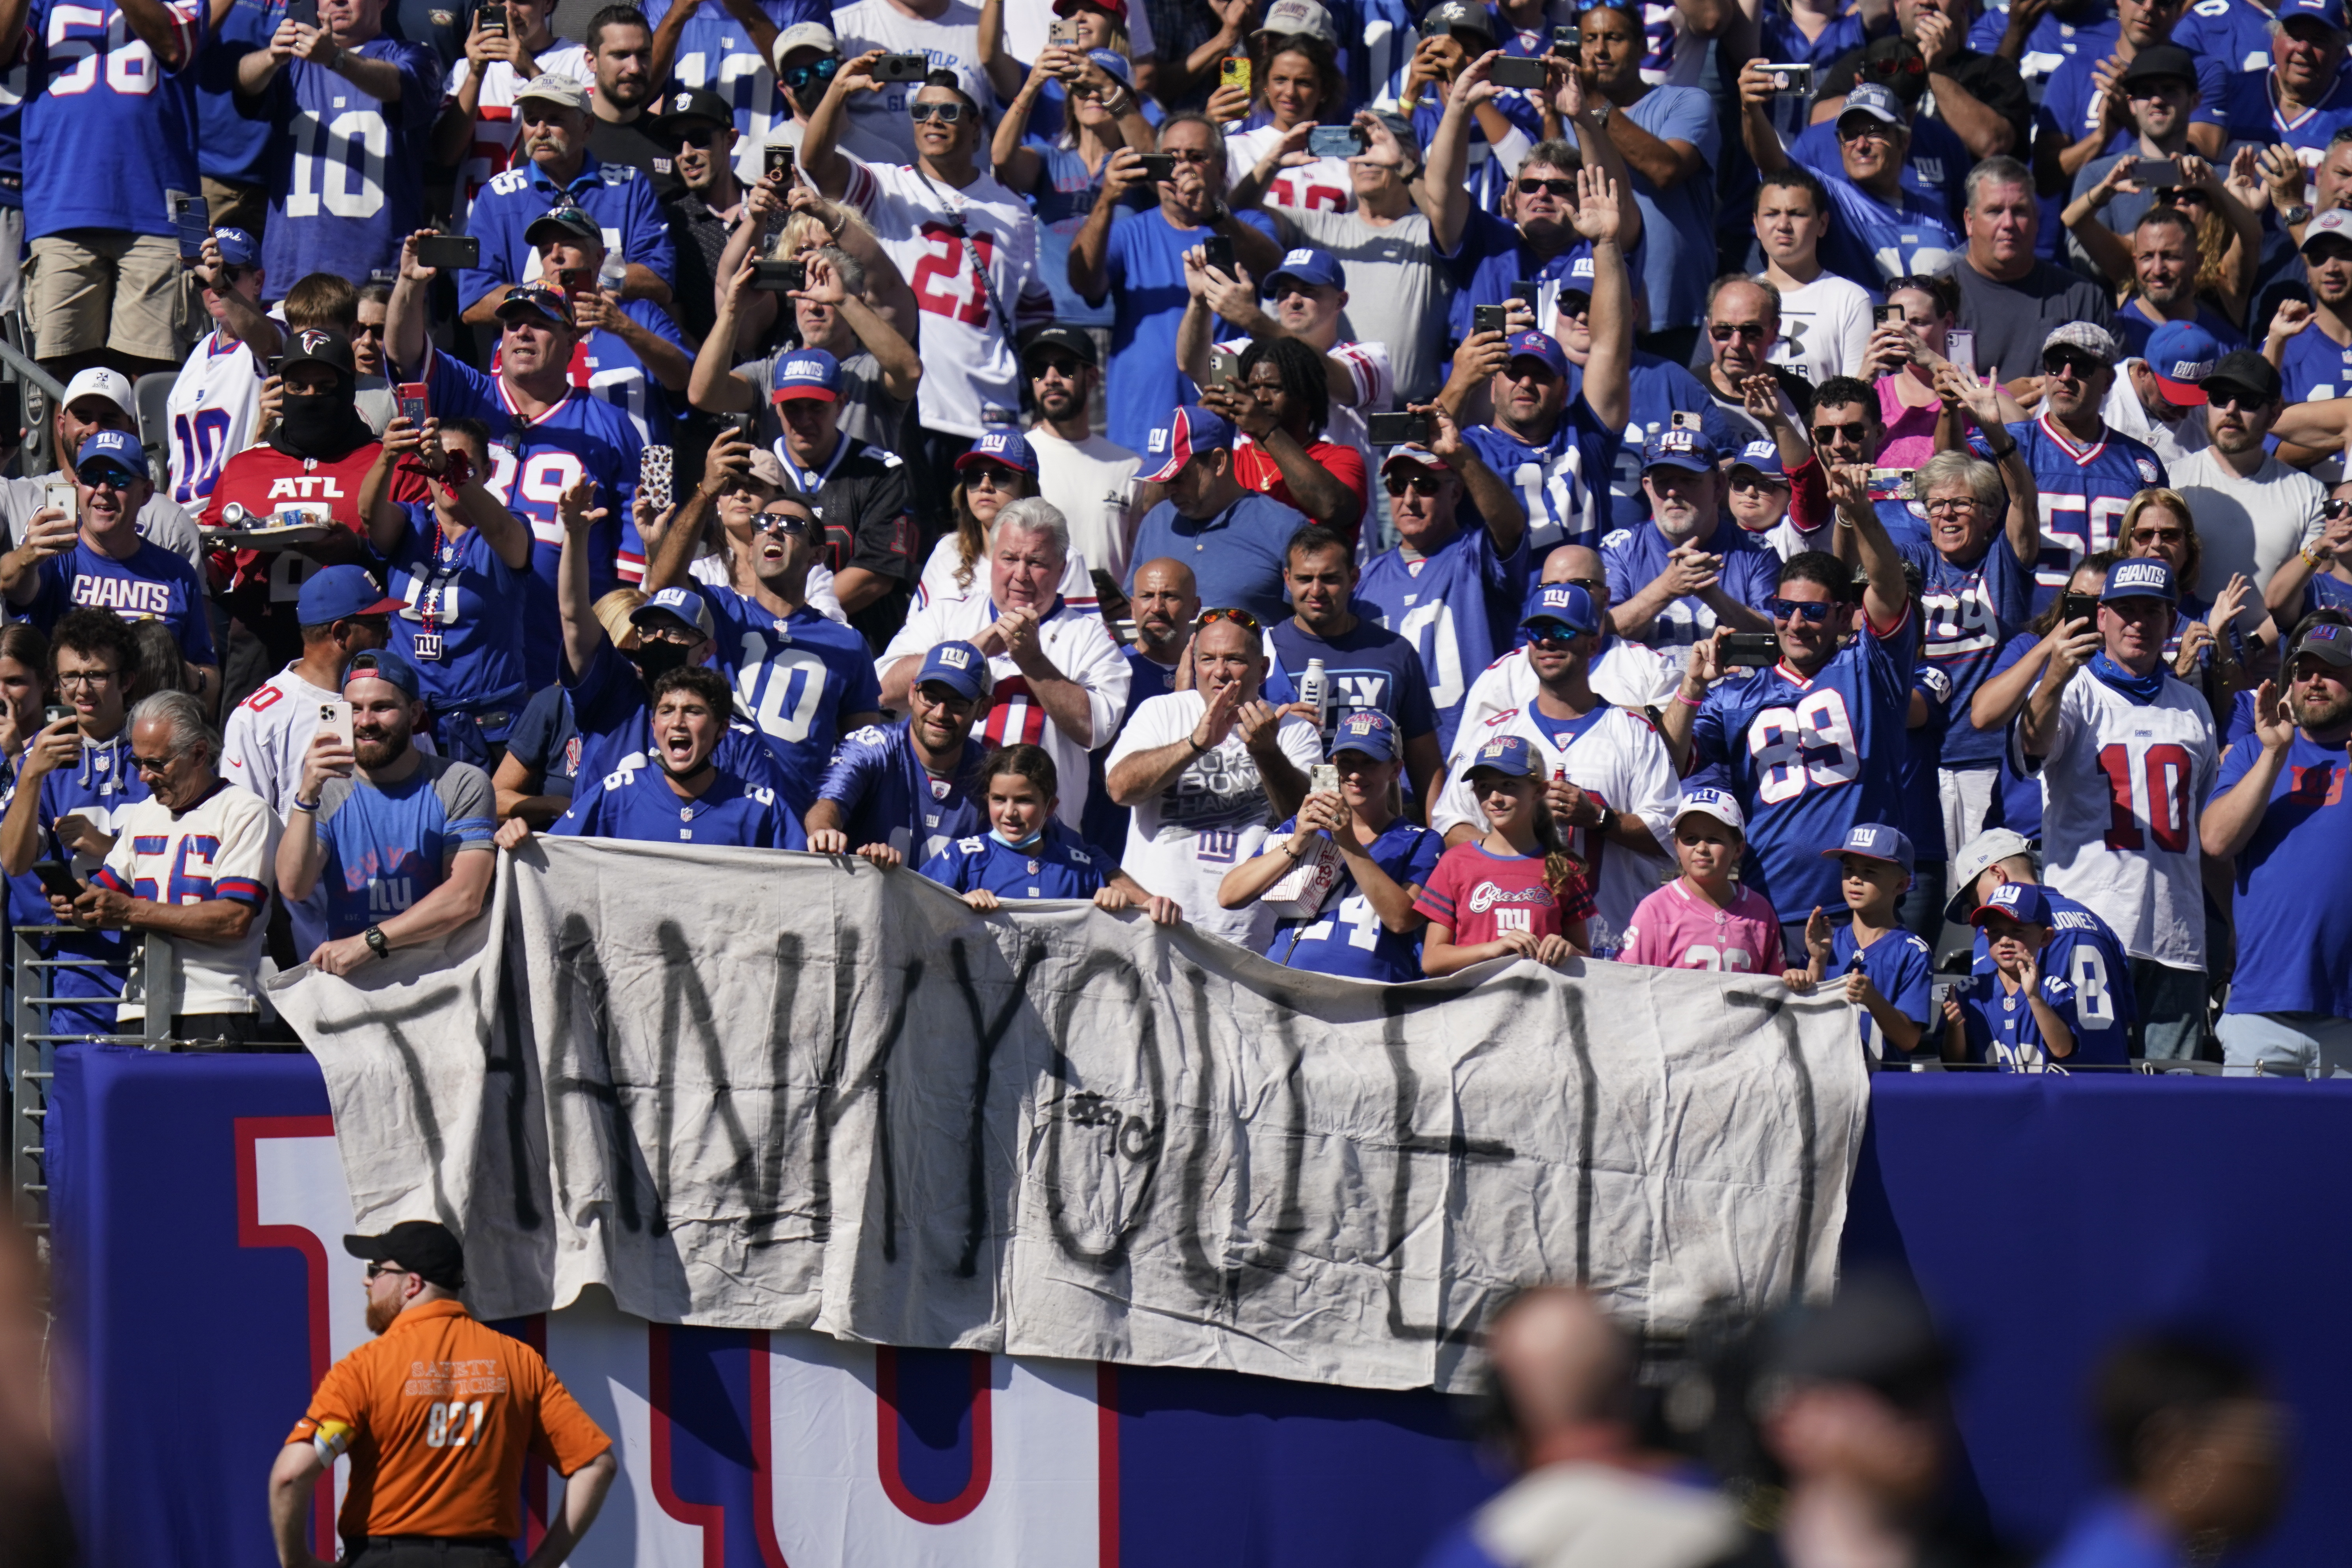 Once a Giant, always a Giant.' Eli Manning's No. 10 retired at